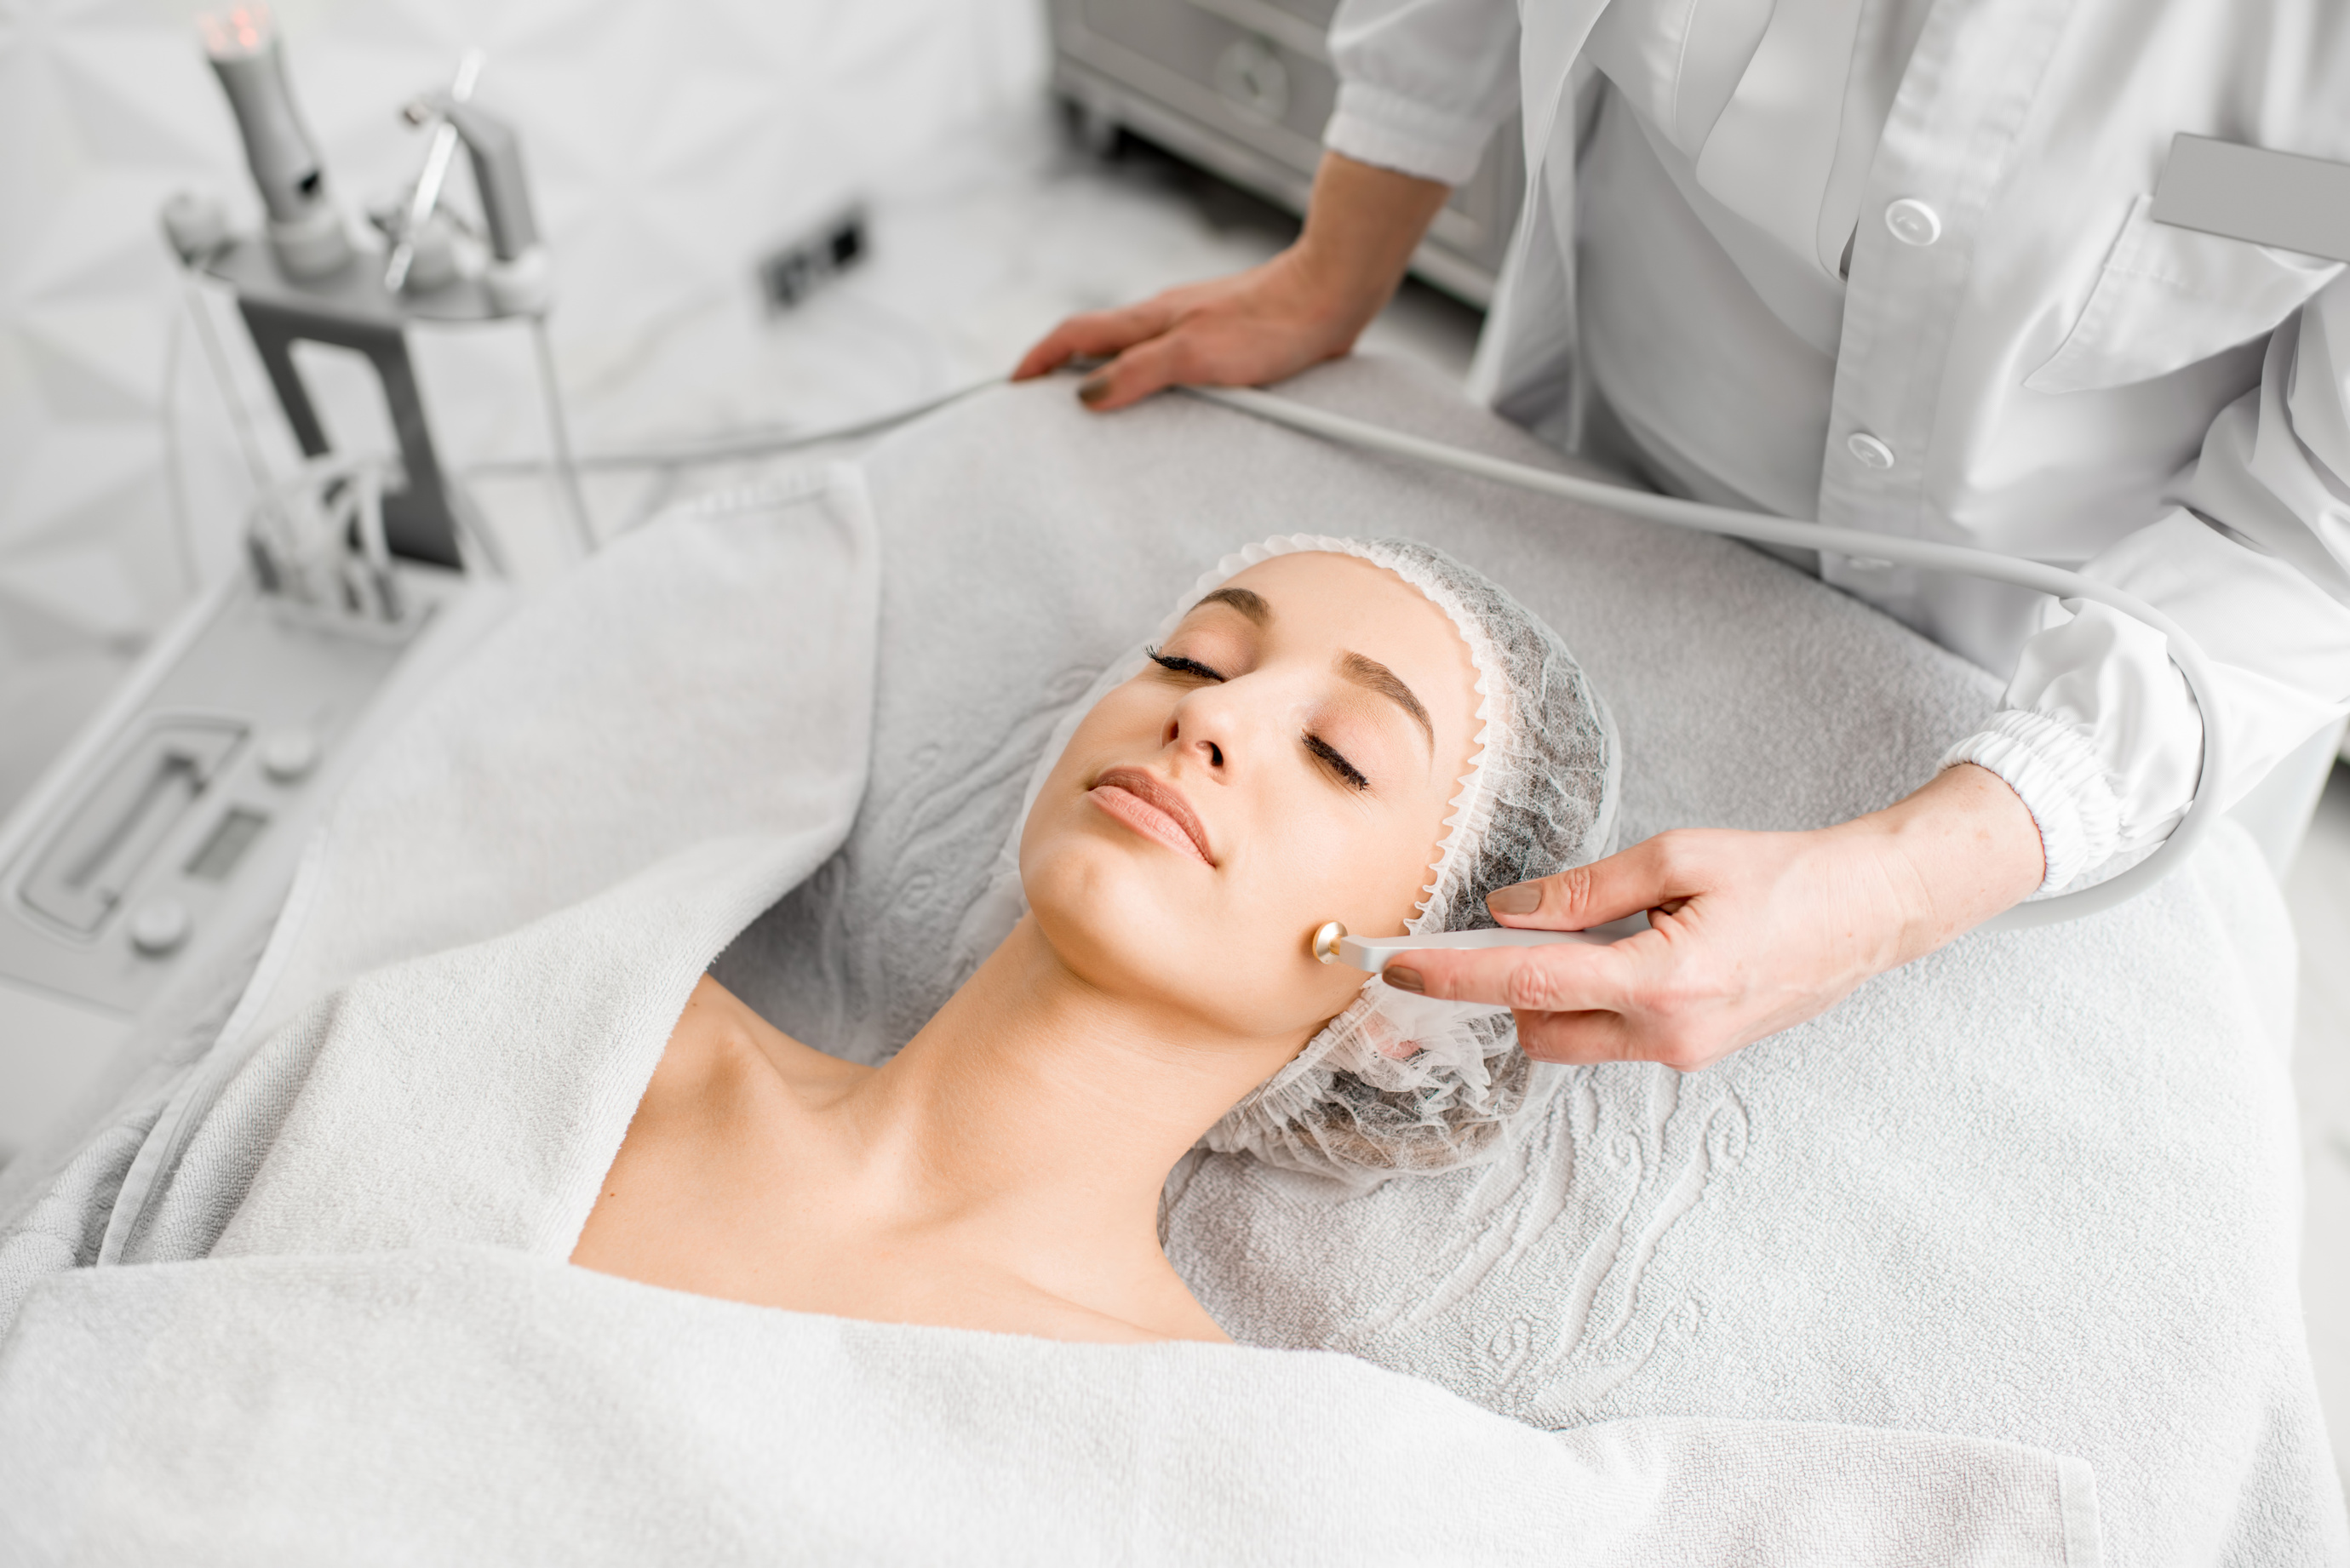 Woman during the Facial Treatment Procedure